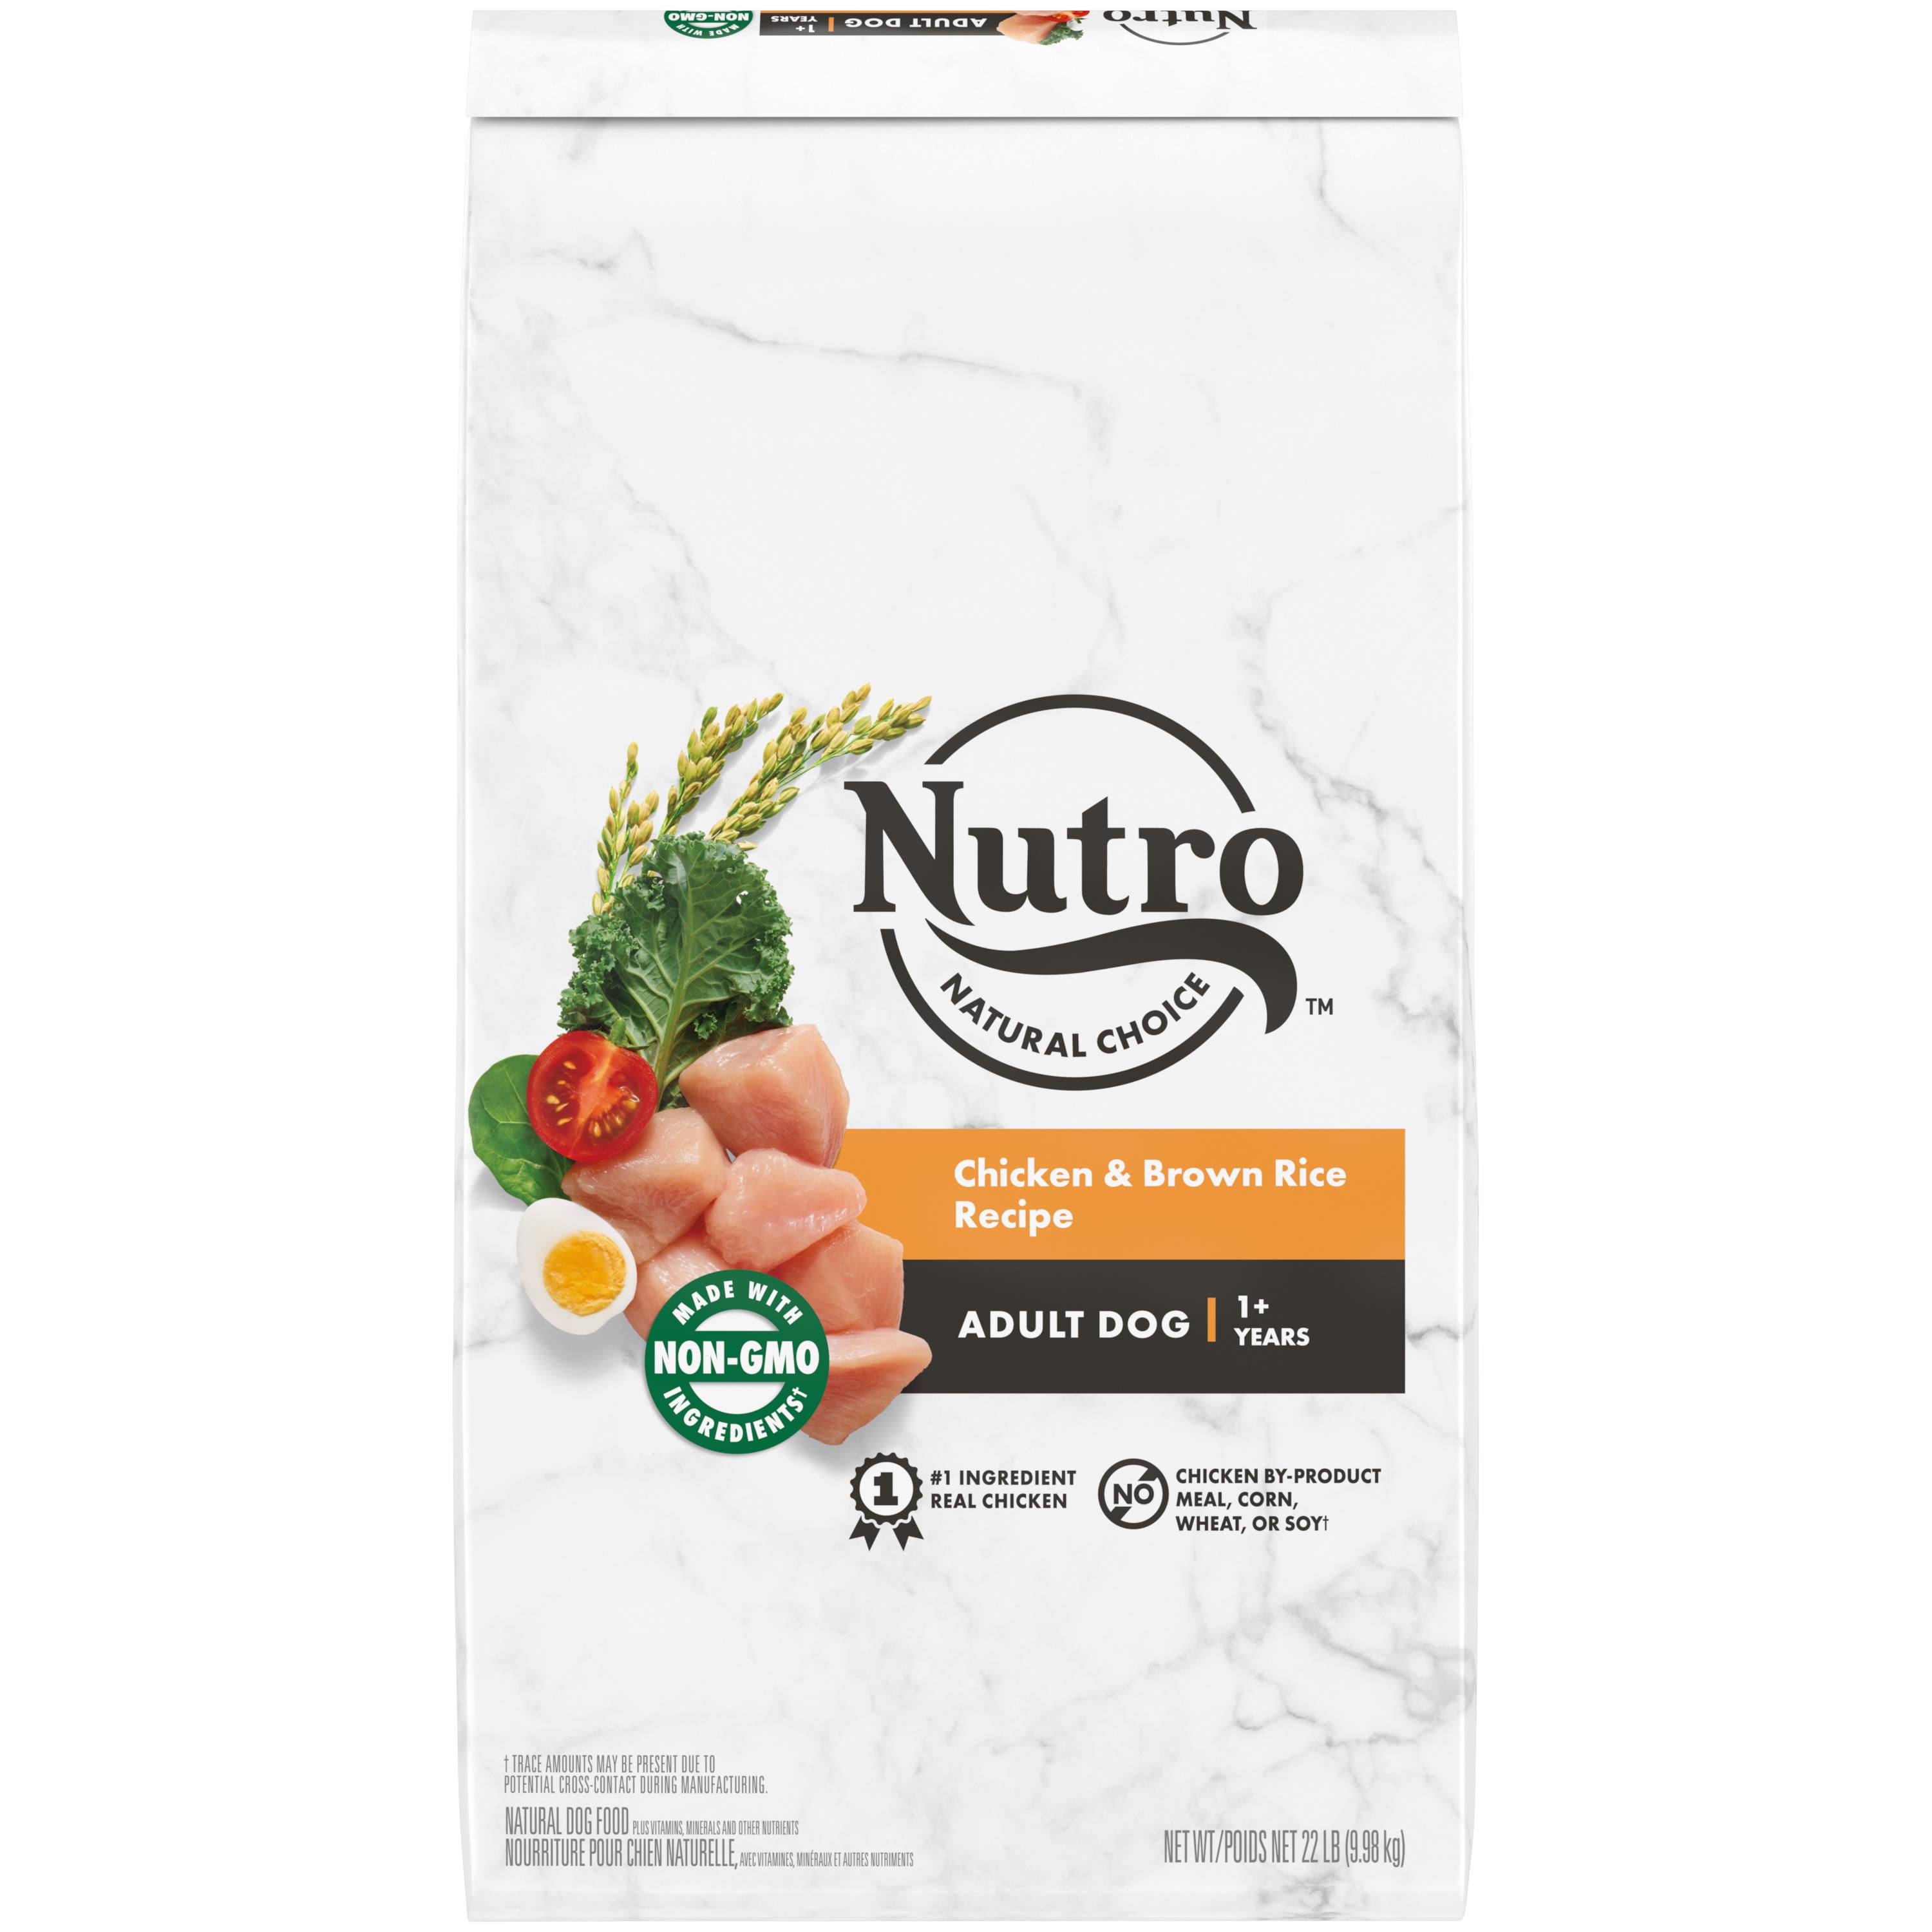 NUTRO NATURAL CHOICE Chicken & Brown Rice Flavor Dry Dog Food for Adult Dog, 22 lb. Bag